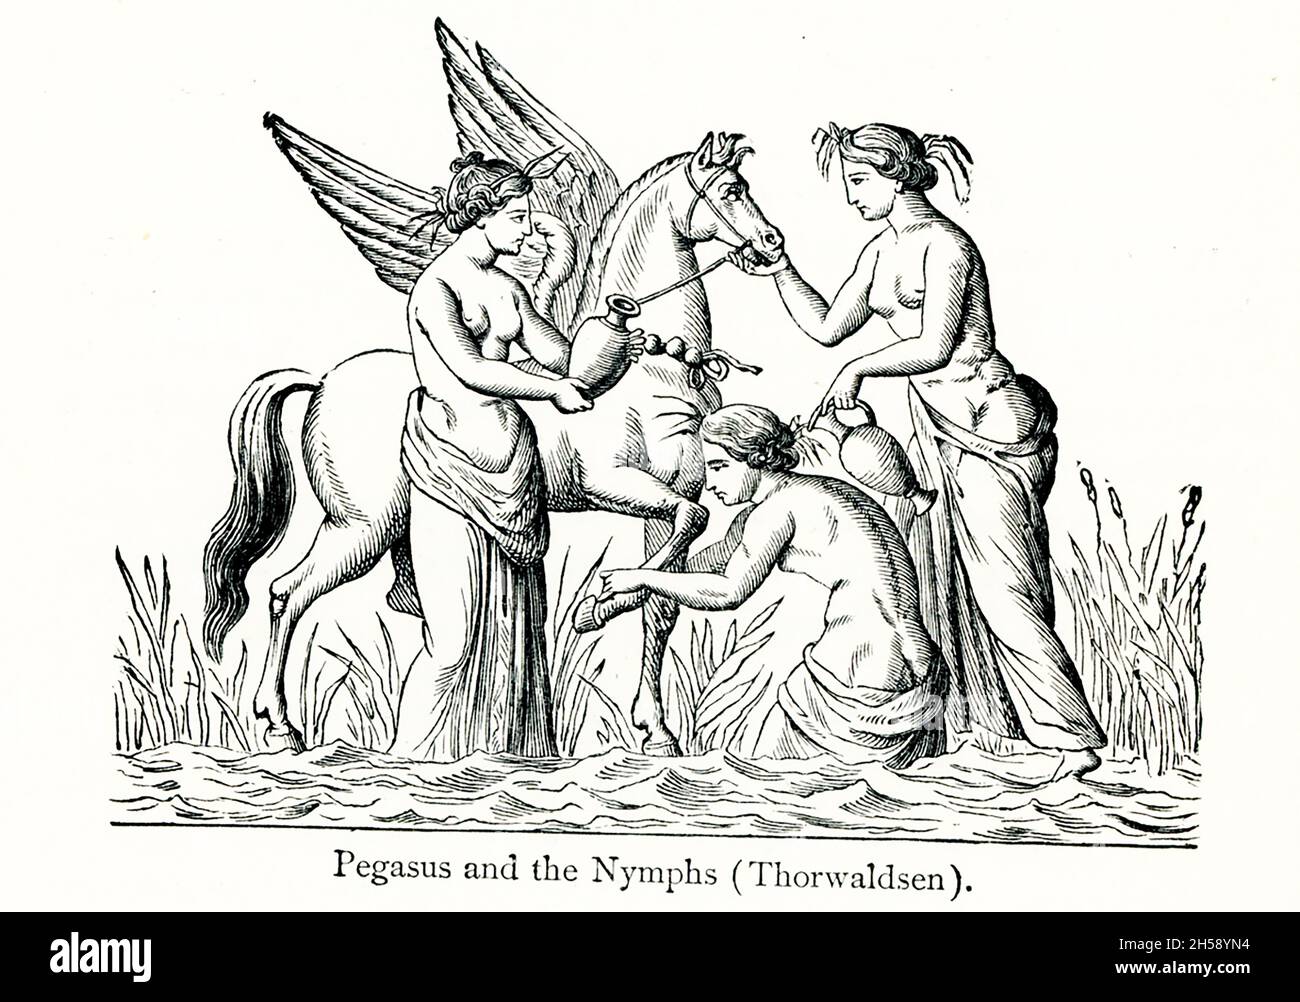 According to Greek mythology, the hero Bellerophon, with the aid of the winged horse Pegasus, slew the monster as the Chimaera, which was part lion, part goat, and part dragon. Bellerophon became too proud of his accomplishments and tried to fly to heaven on Pegasus, but was thrown and blinded—and according to one legend, killed. This illustration shows Pegasus and three nymphs caring for him. It was done by Bertel Thorvaldsen (1770 –1844), a Danish sculptor and medalist of international fame Stock Photo